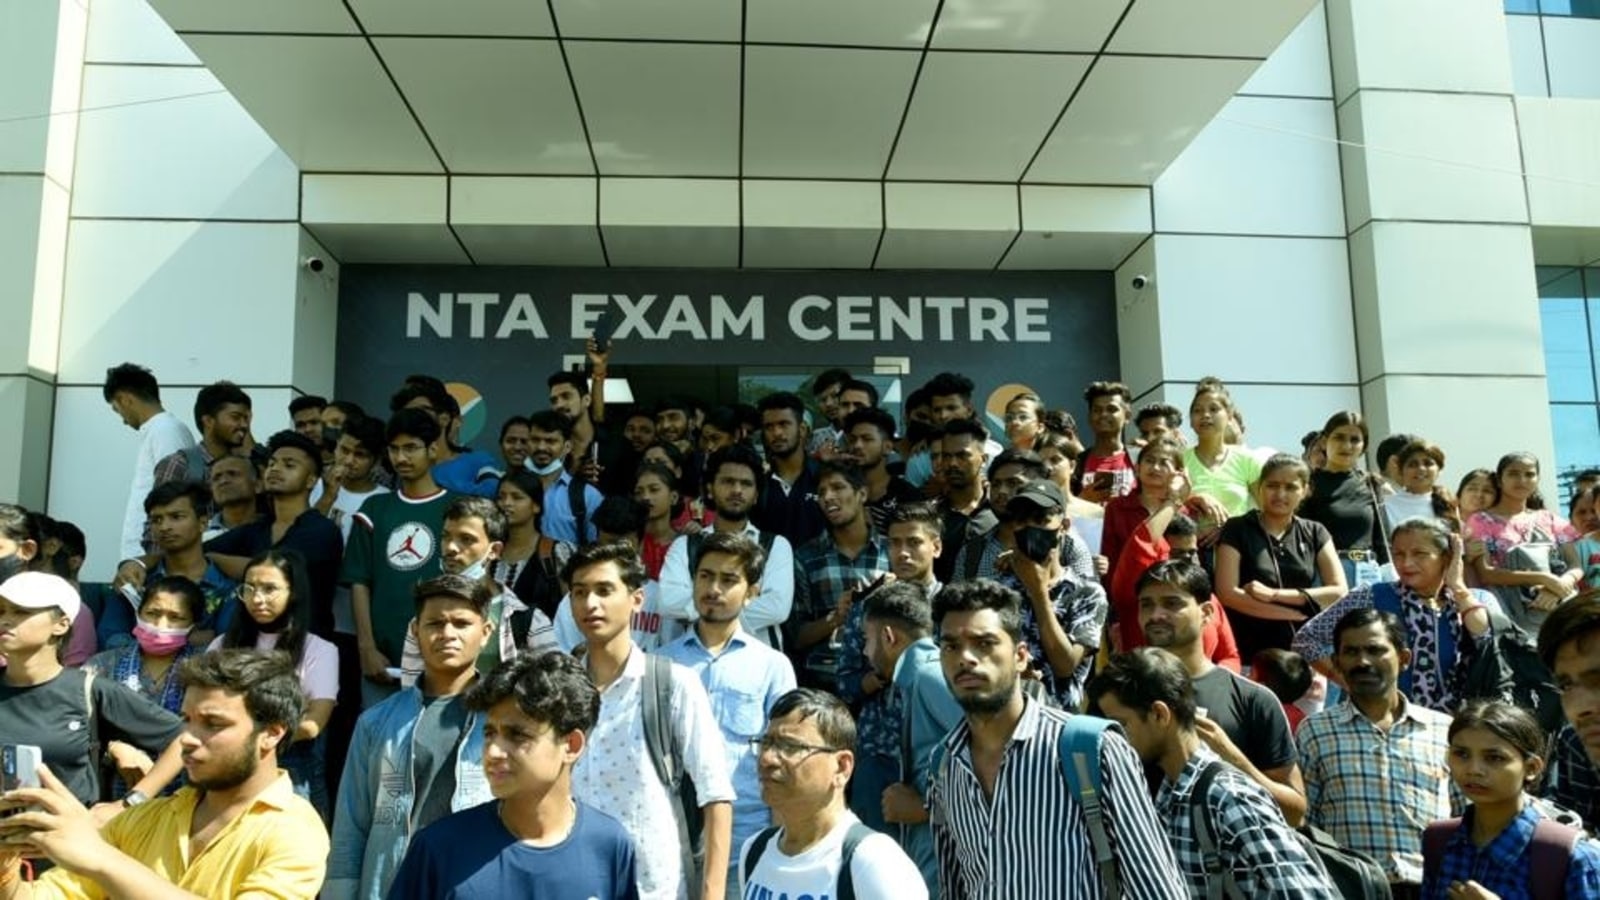 CUET UG: 8 instances when India’s 2nd largest entrance test was hit by glitches